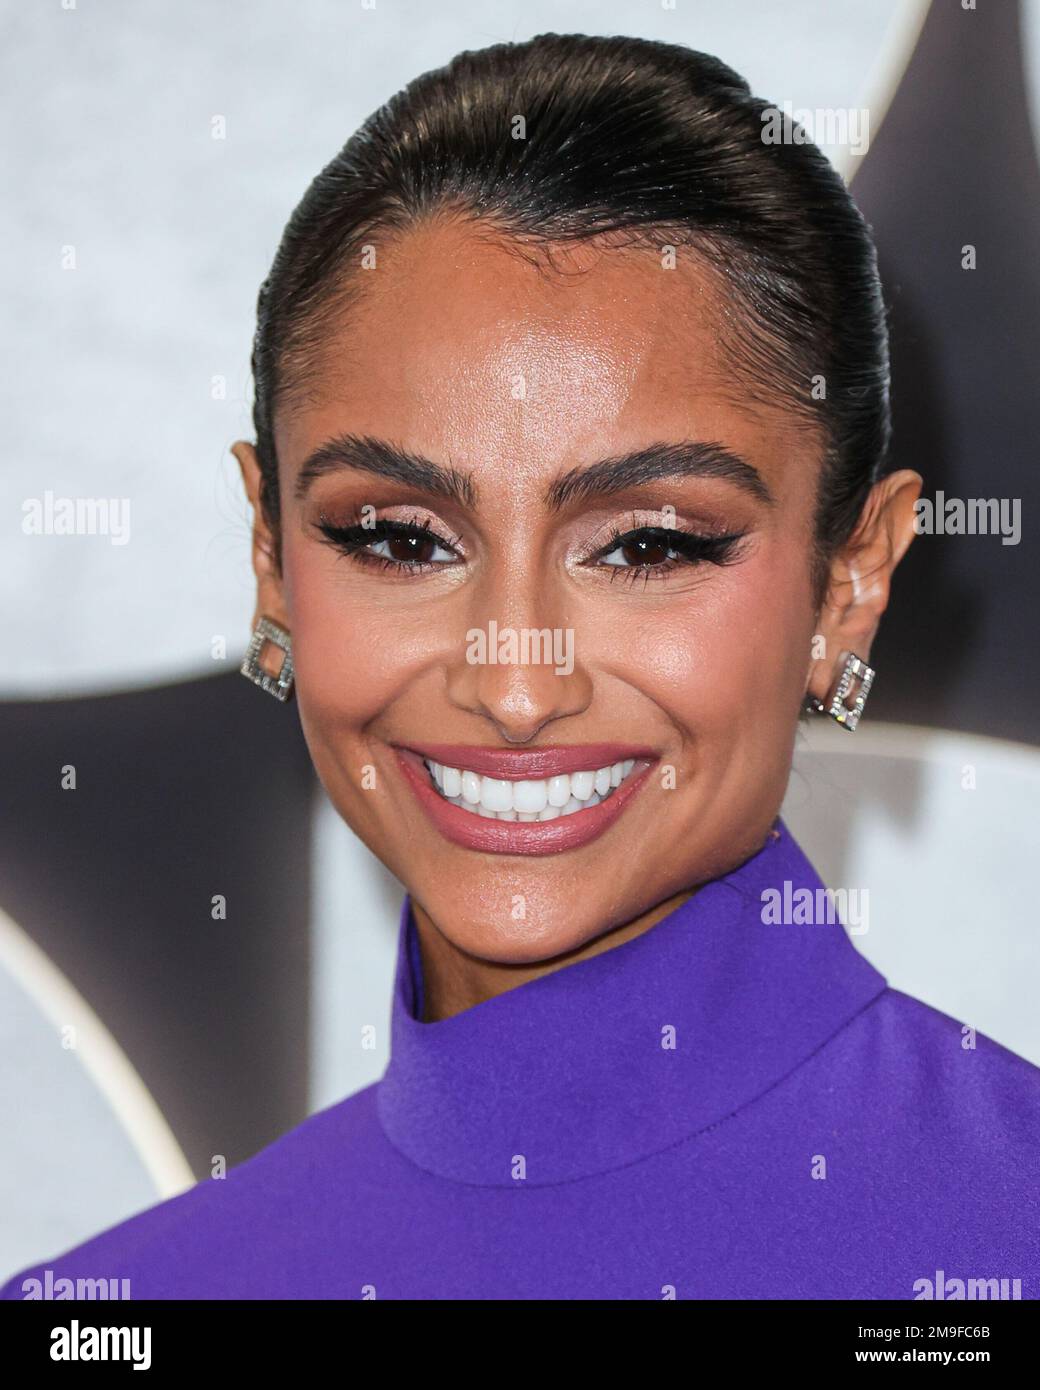 WESTWOOD, LOS ANGELES, CALIFORNIA, USA - JANUARY 17: American actress, singer, model and life coach Nazanin Mandi arrives at the Los Angeles Premiere Of Netflix's 'You People' held at the Regency Village Theatre on January 17, 2023 in Westwood, Los Angeles, California, United States. (Photo by Xavier Collin/Image Press Agency) Stock Photo